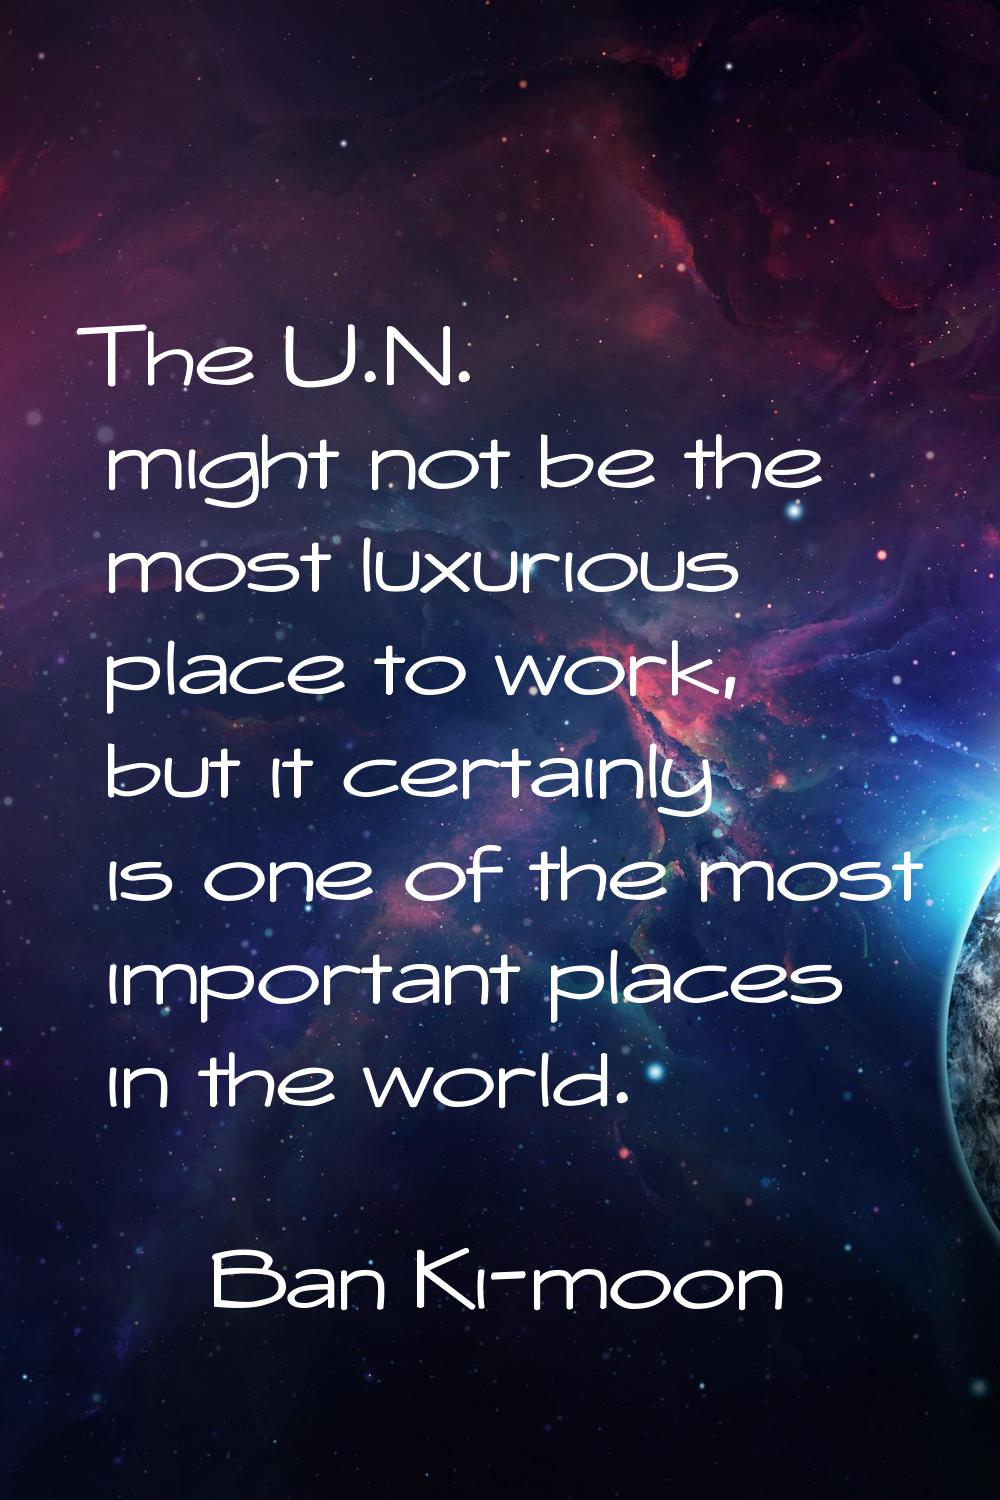 The U.N. might not be the most luxurious place to work, but it certainly is one of the most importa